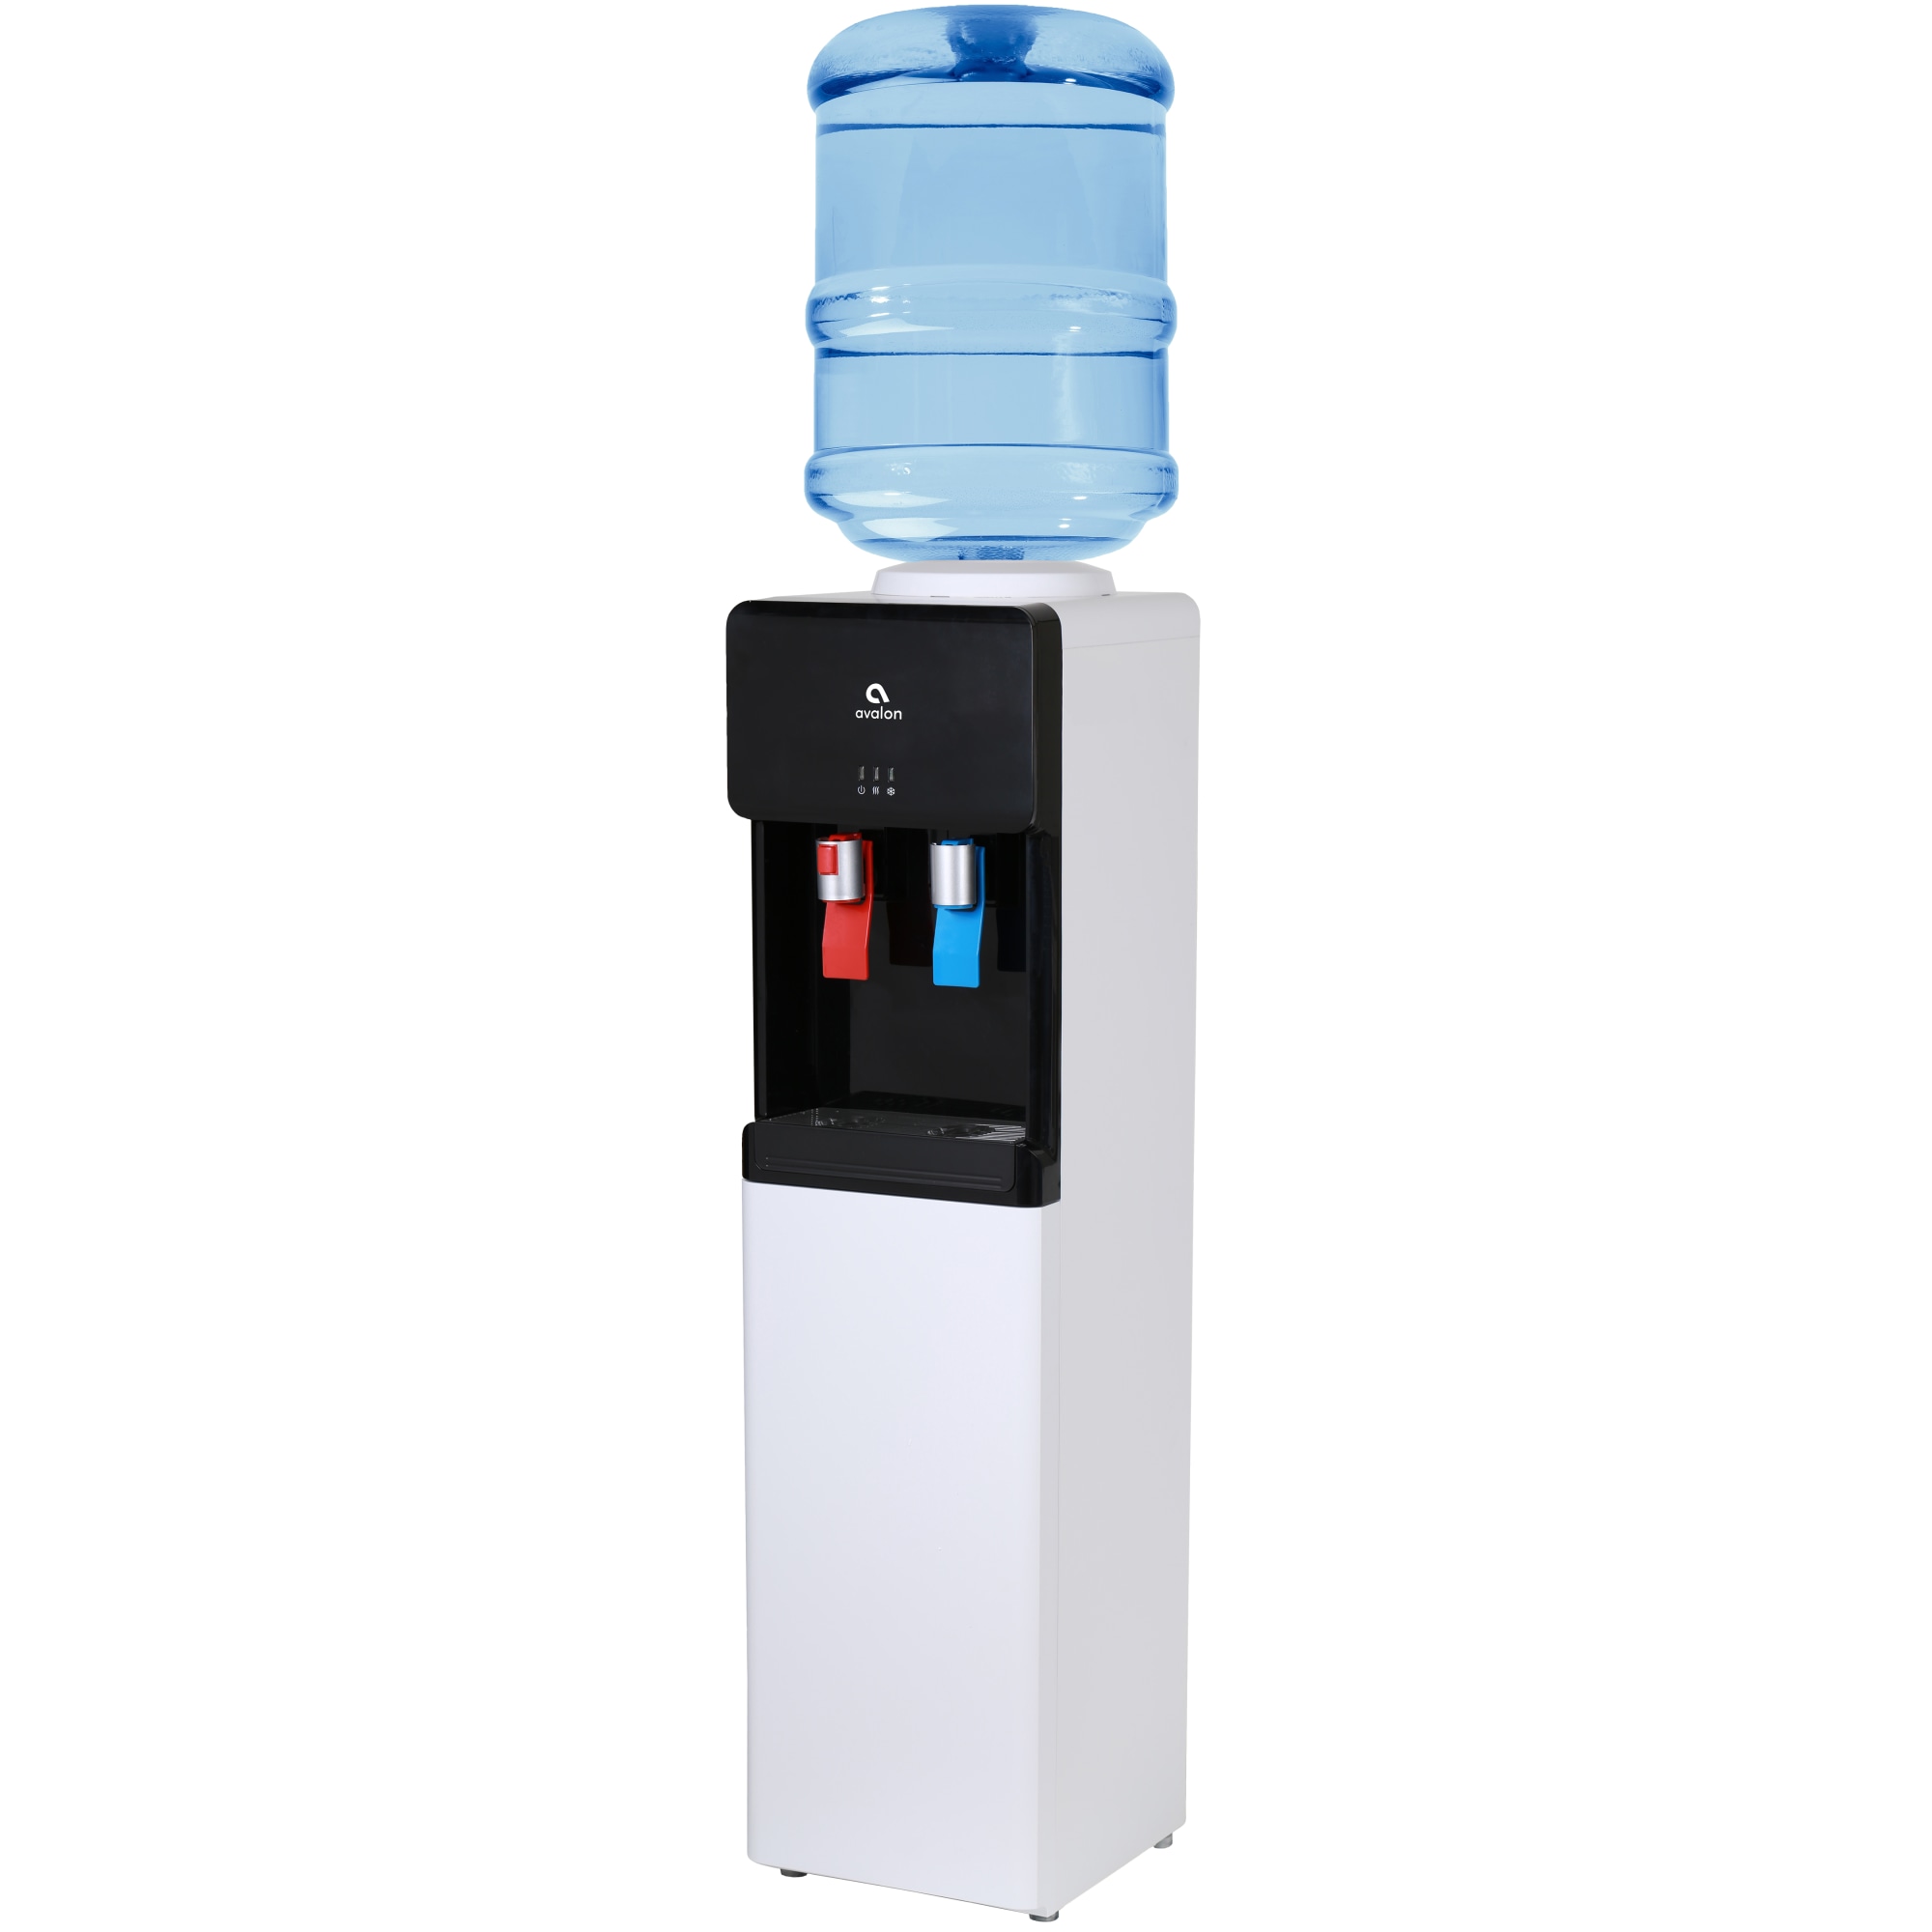 Avalon Top Loading Water Dispenser - Hot & Cold Water Temperature, Child Safety Lock, Black - image 2 of 3